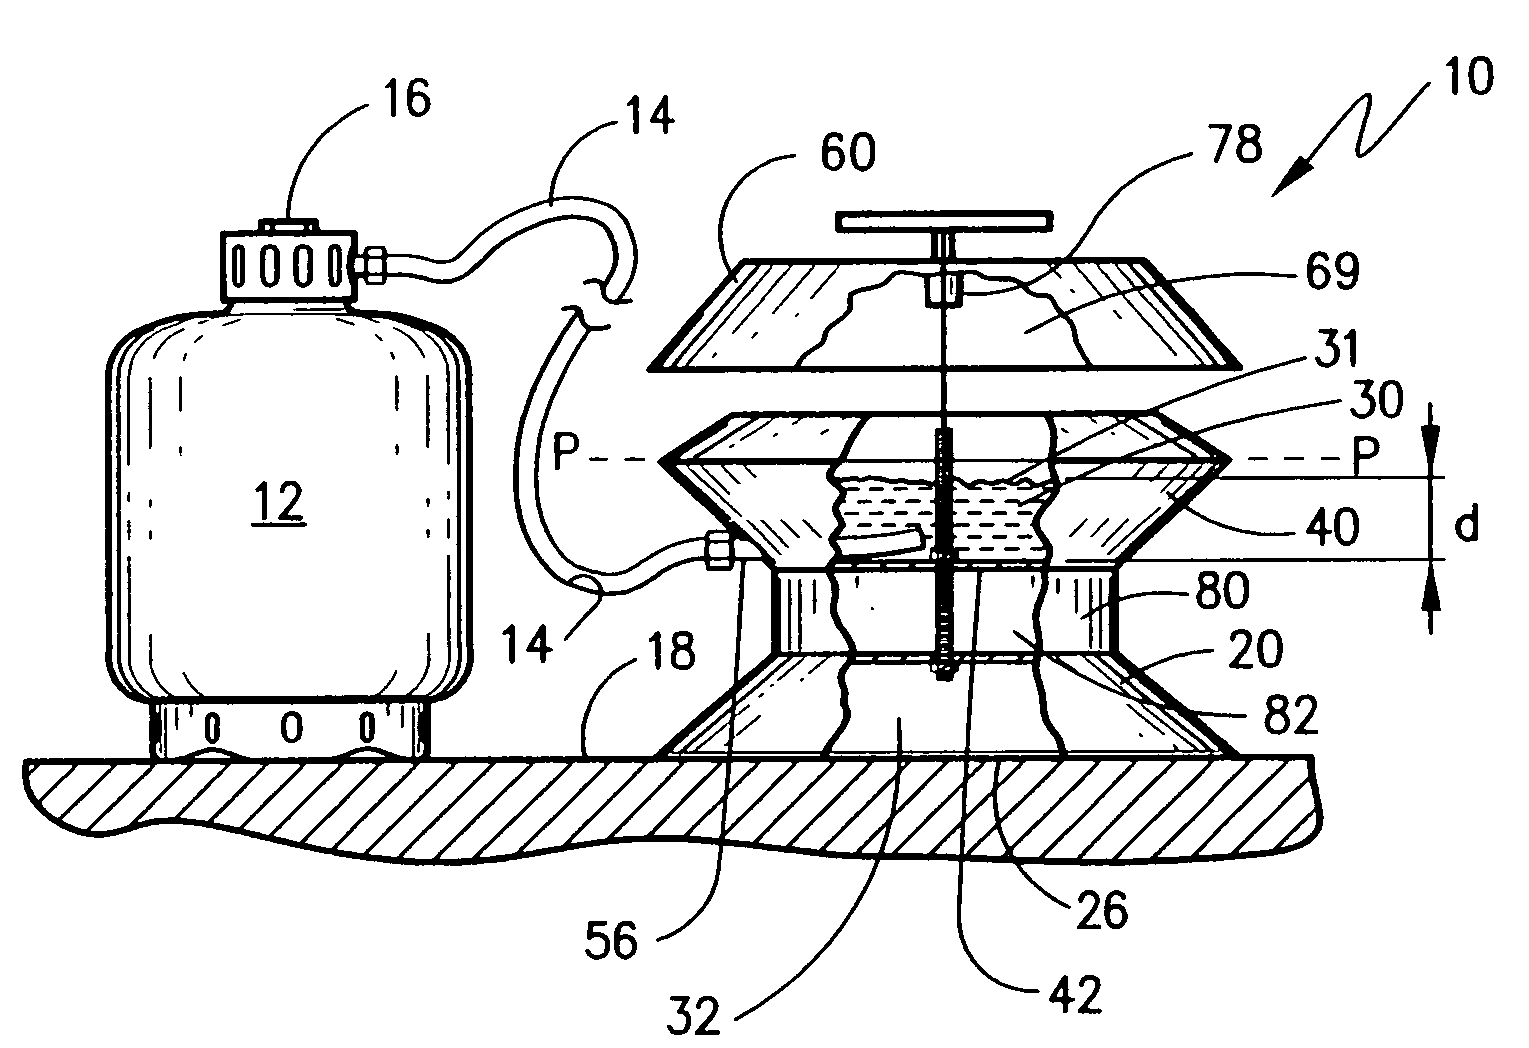 Apparatus and method for simulated campfire